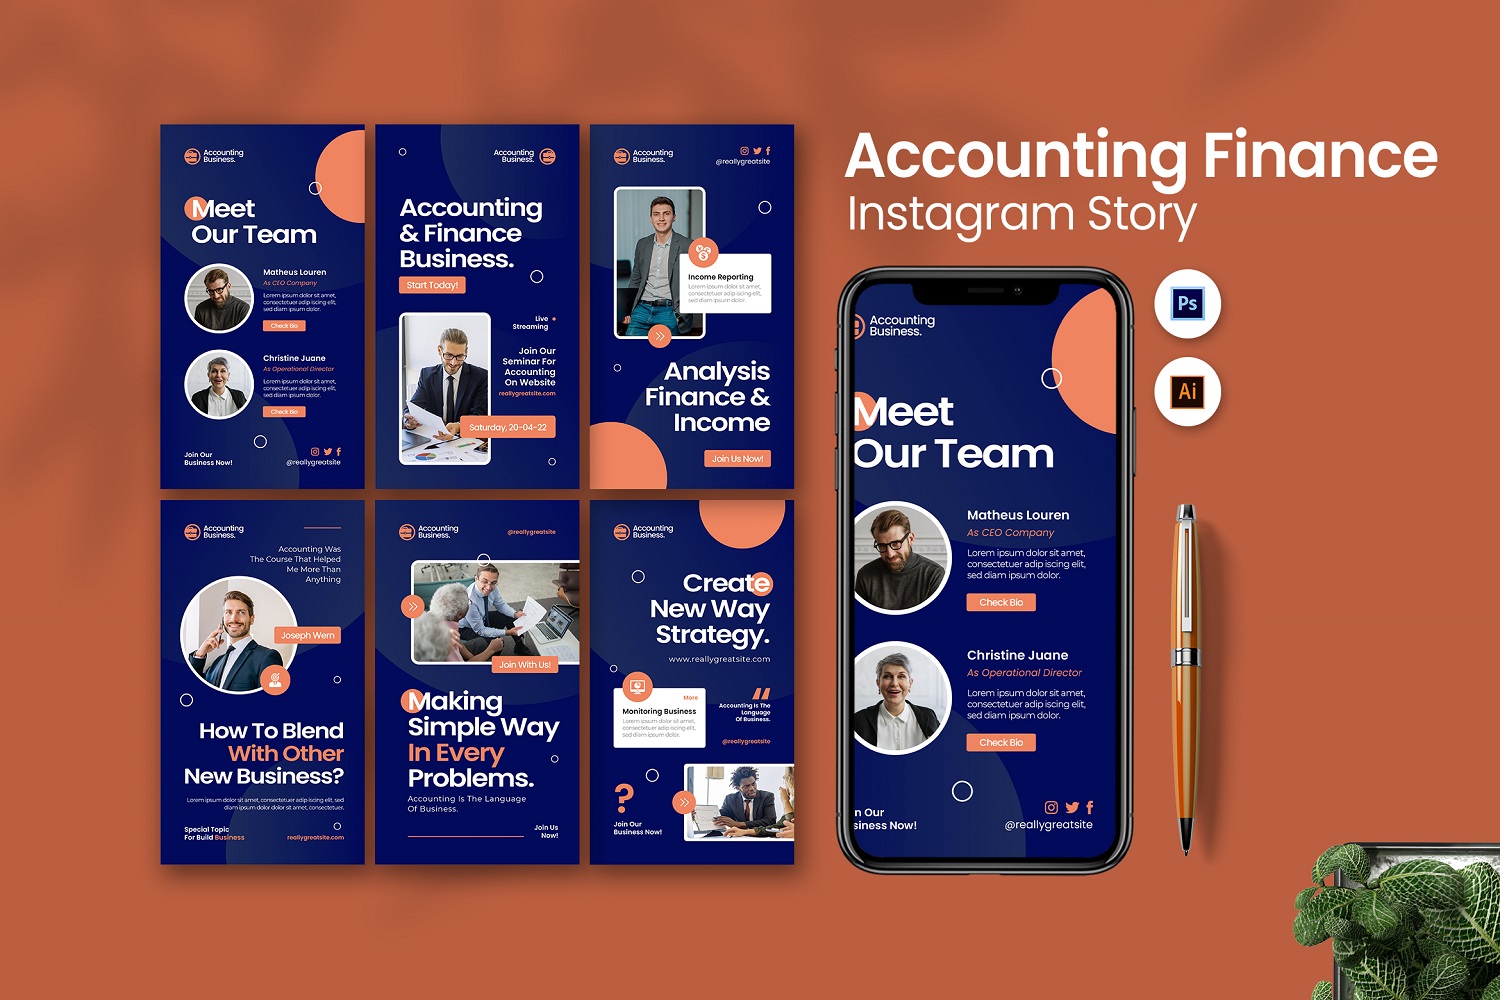 Accounting Finance Instagram Story